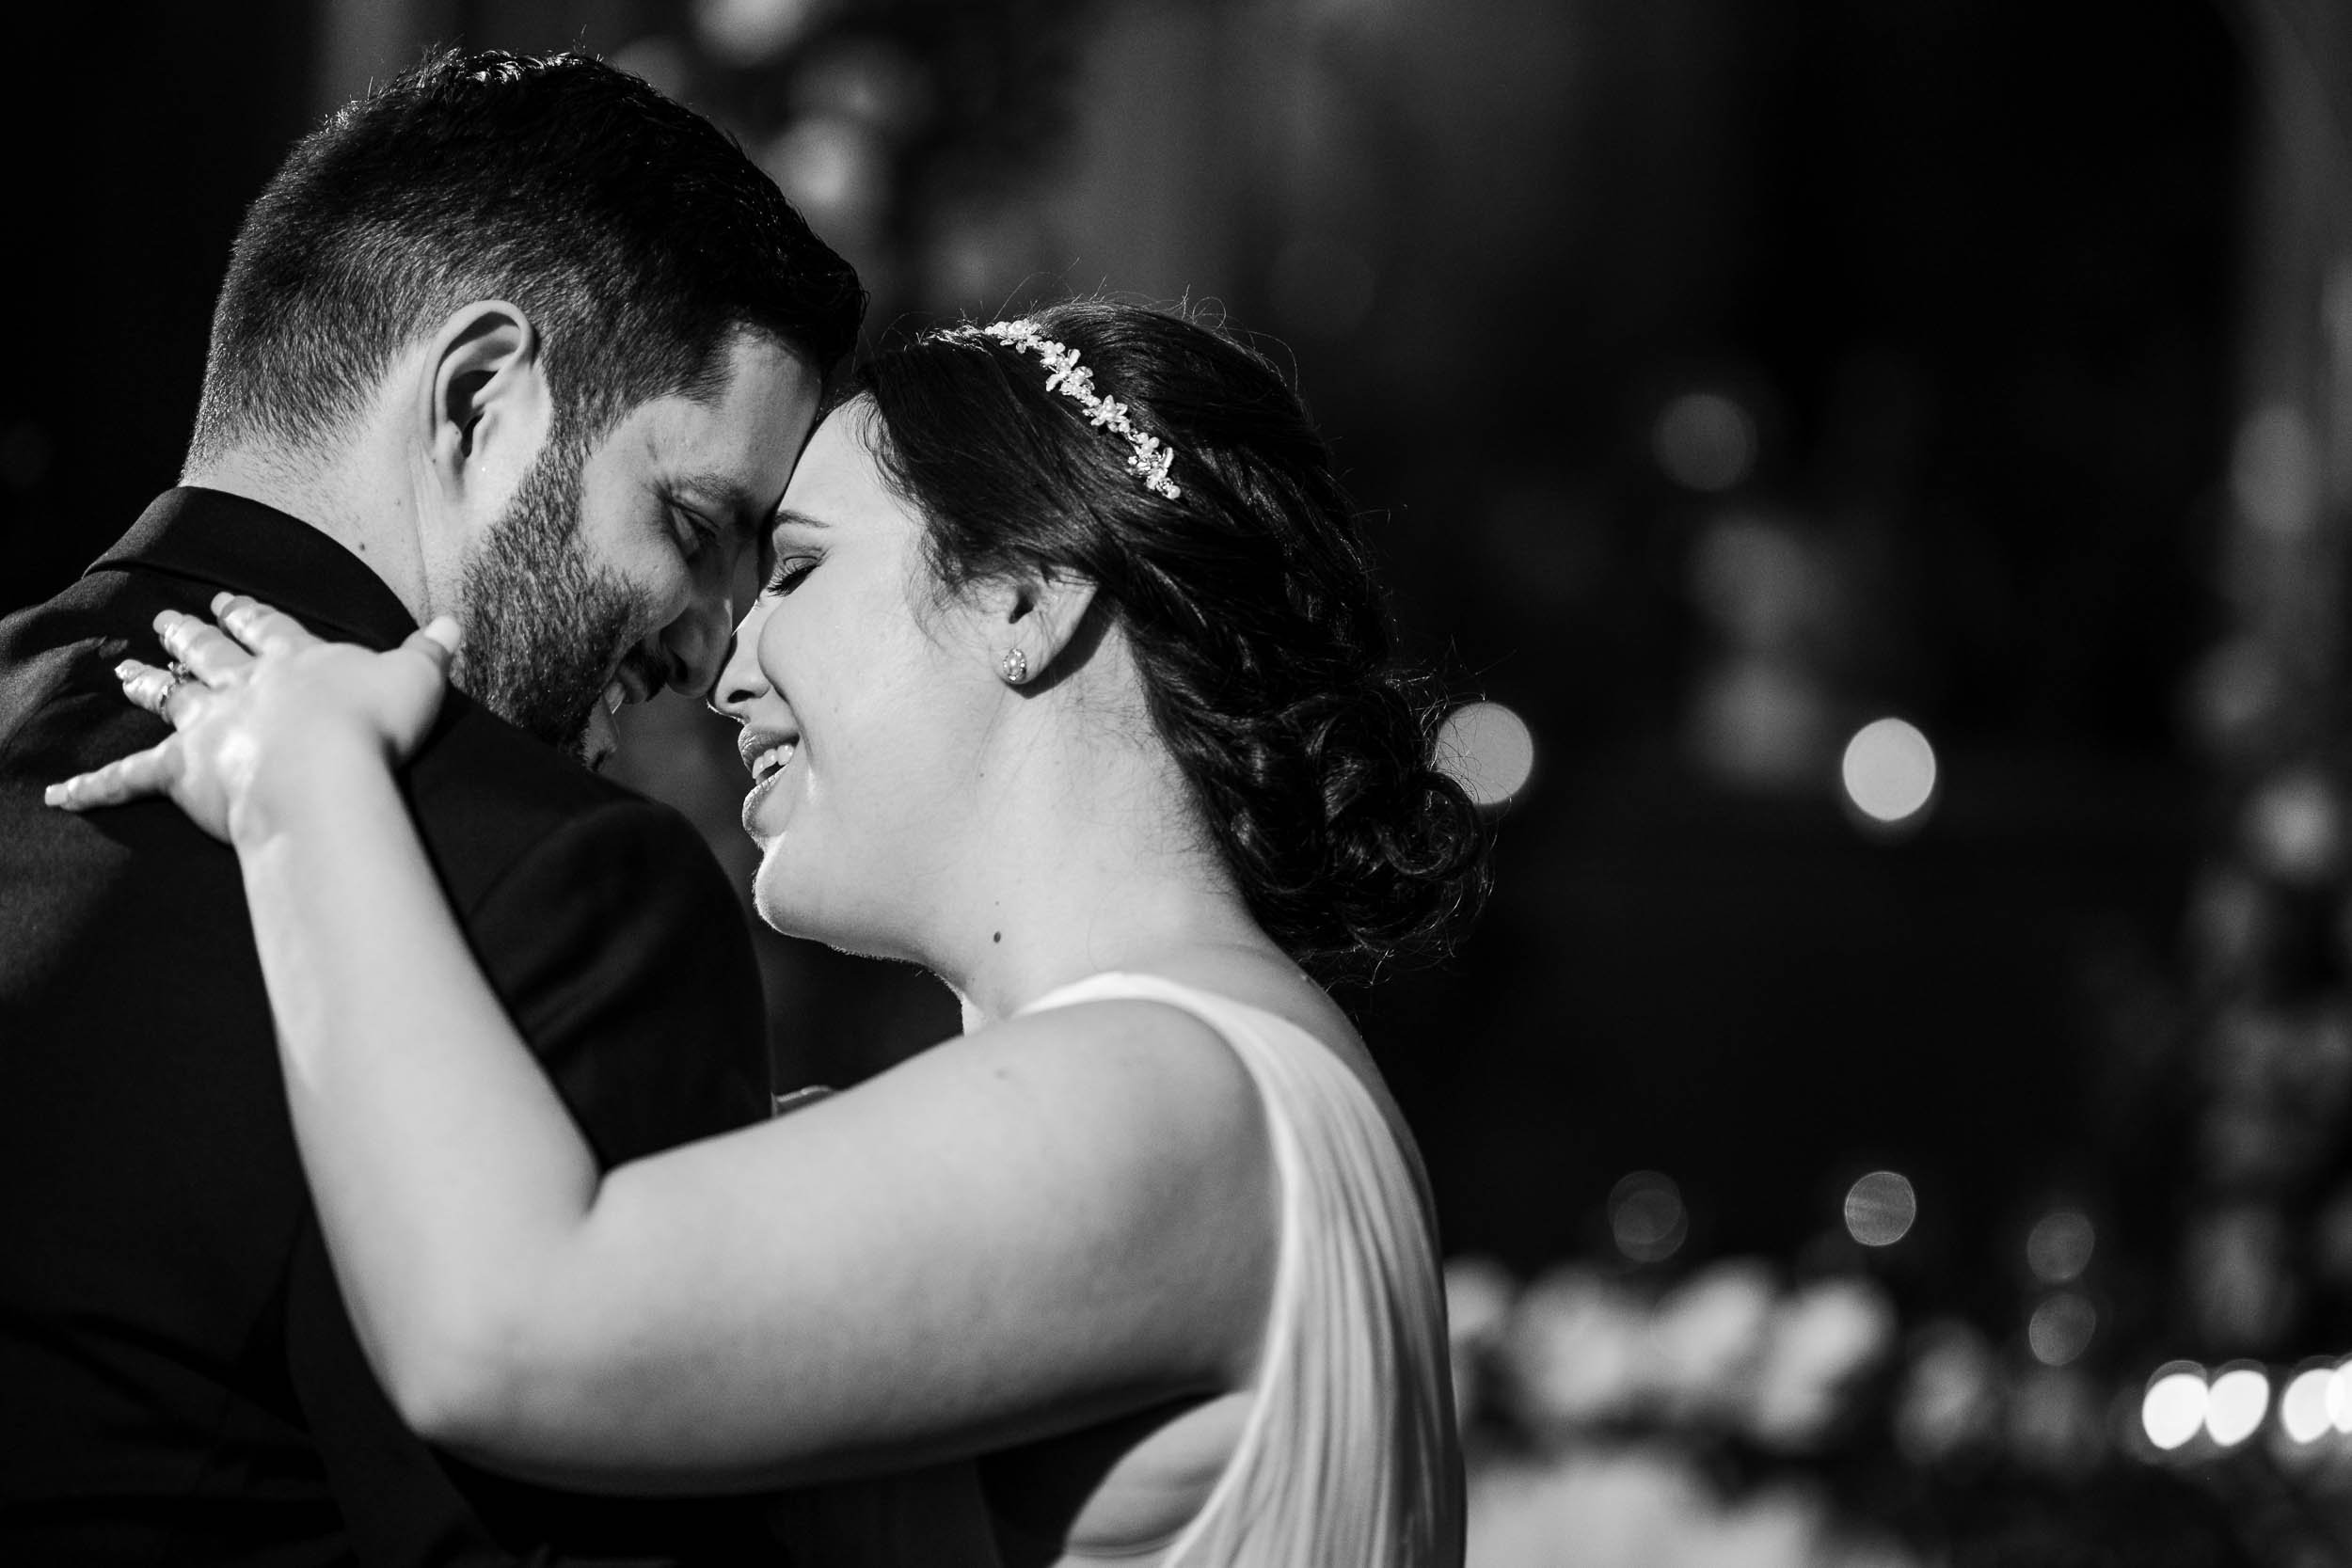 Chicago Wedding Photographer | Newberry Library | J. Brown Photography | emotional moment during first dance.